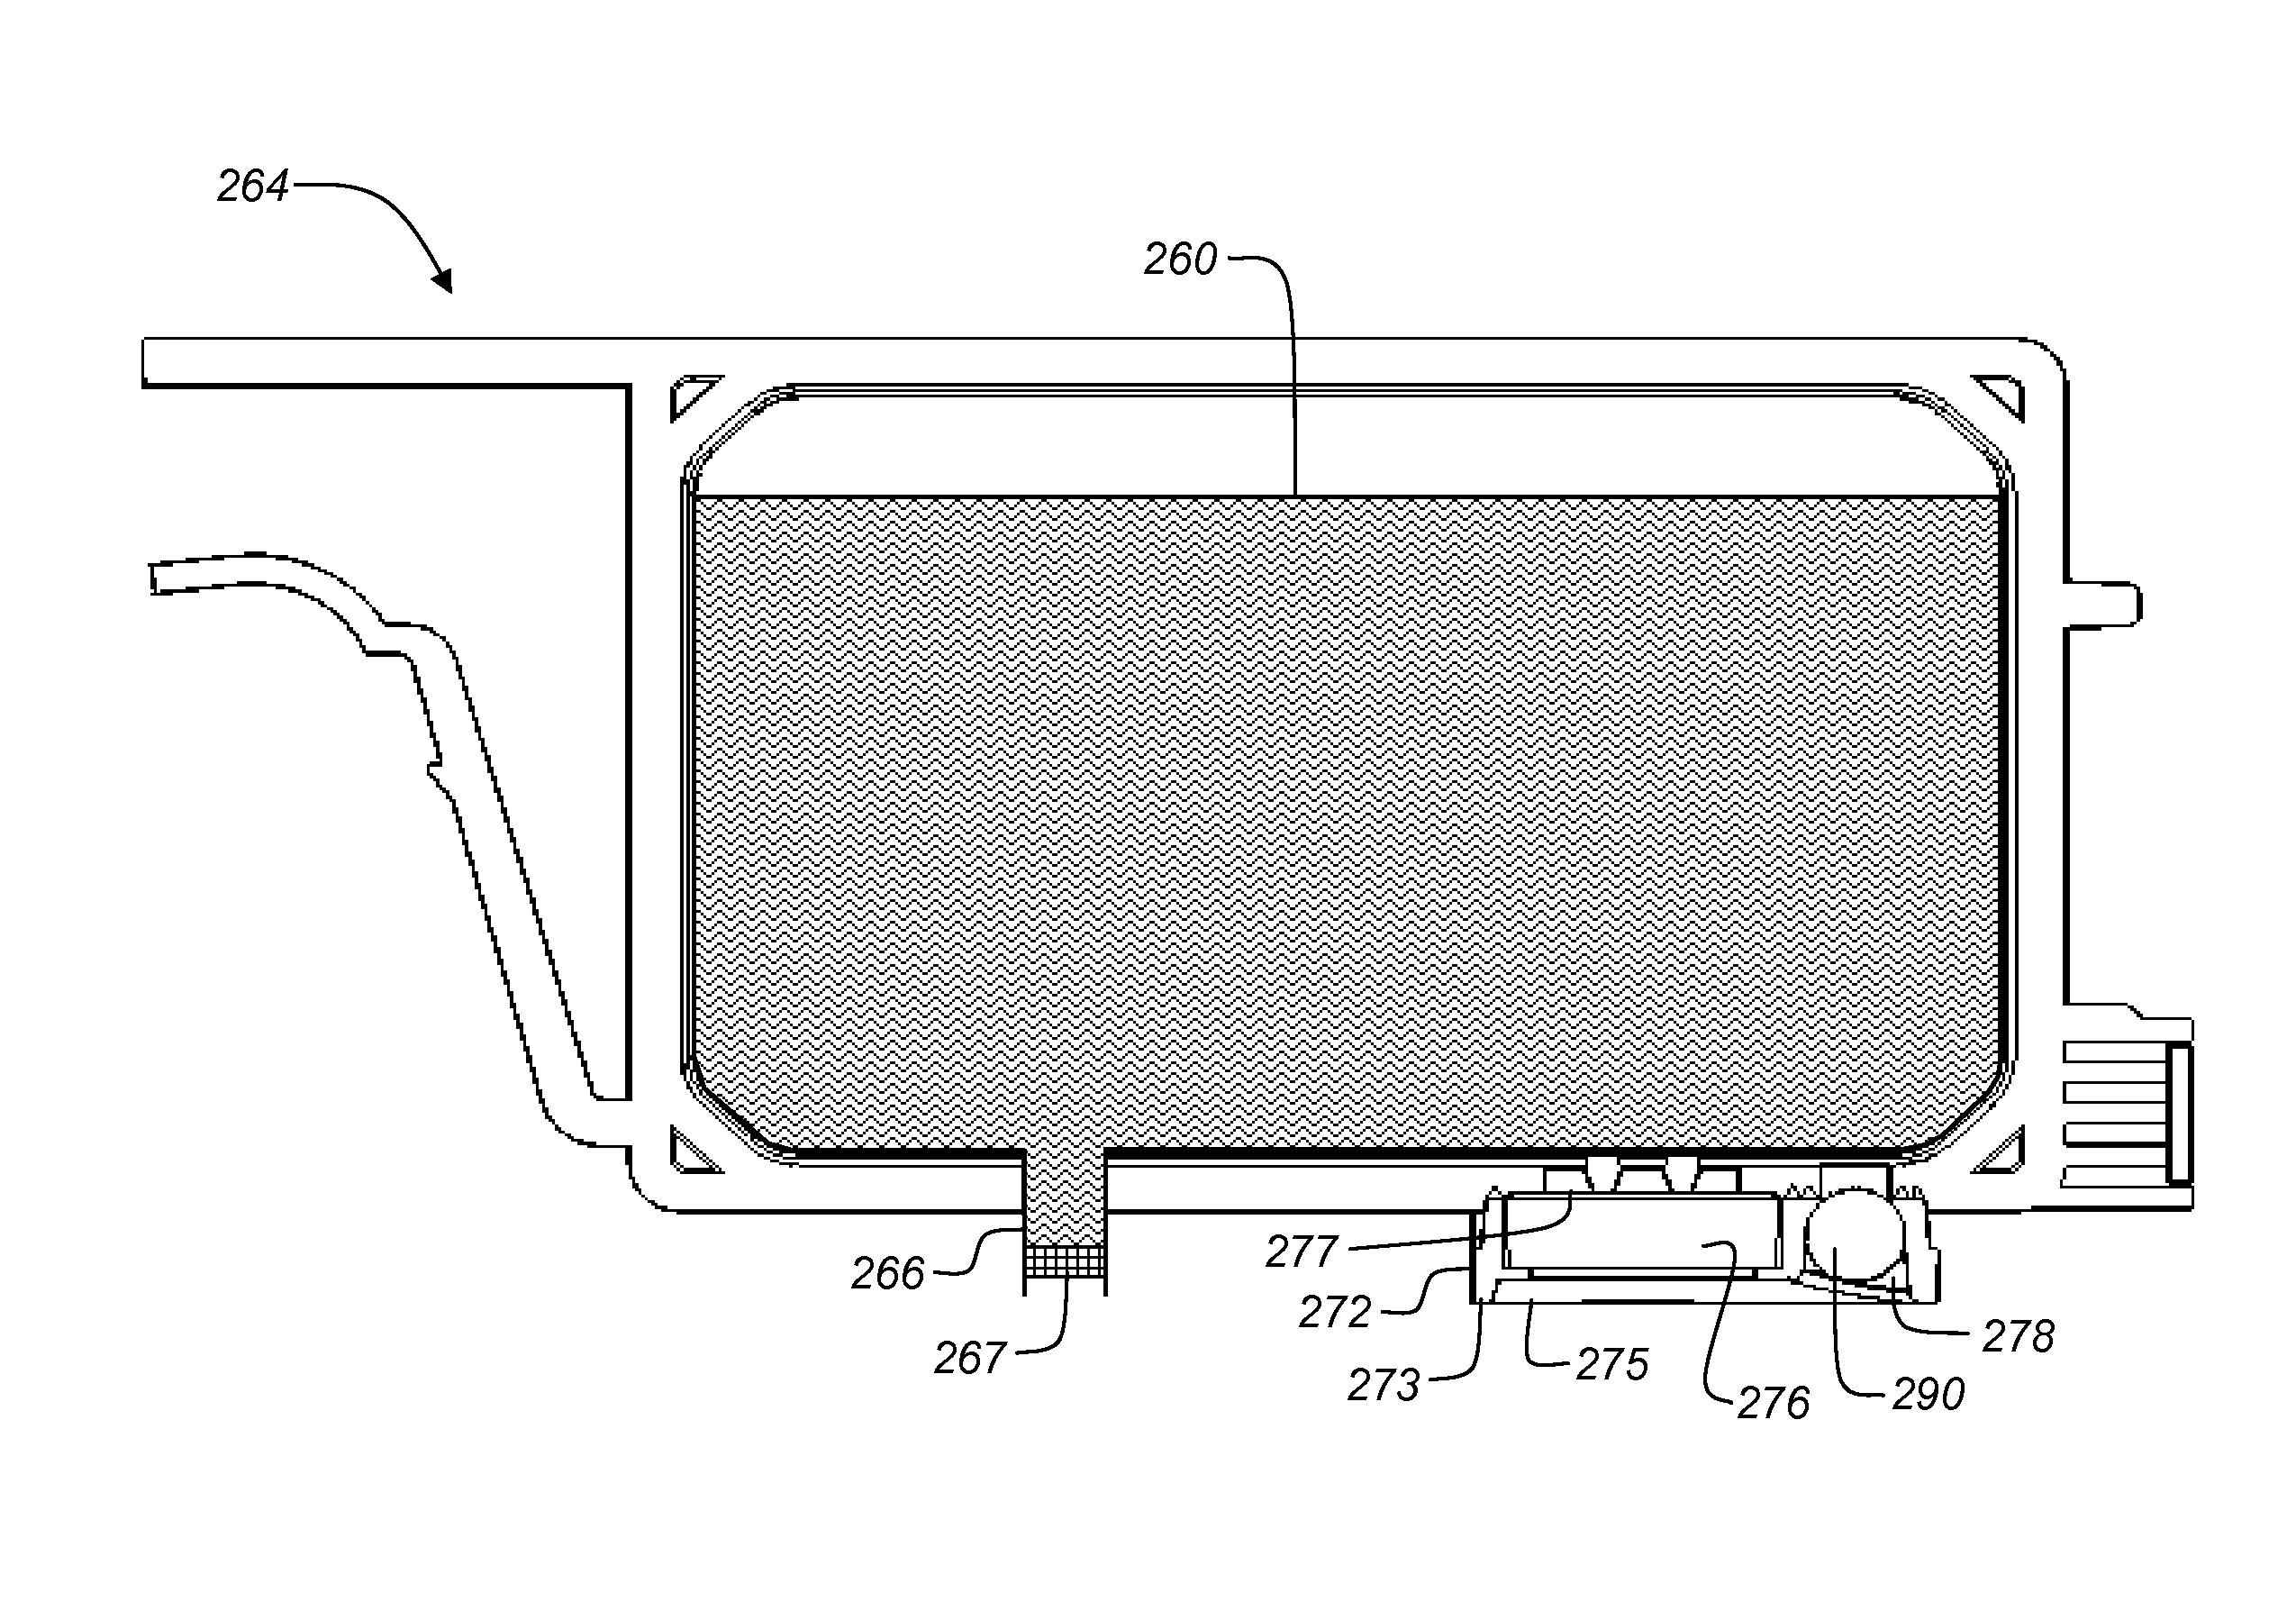 Biased wall ink tank with capillary breather